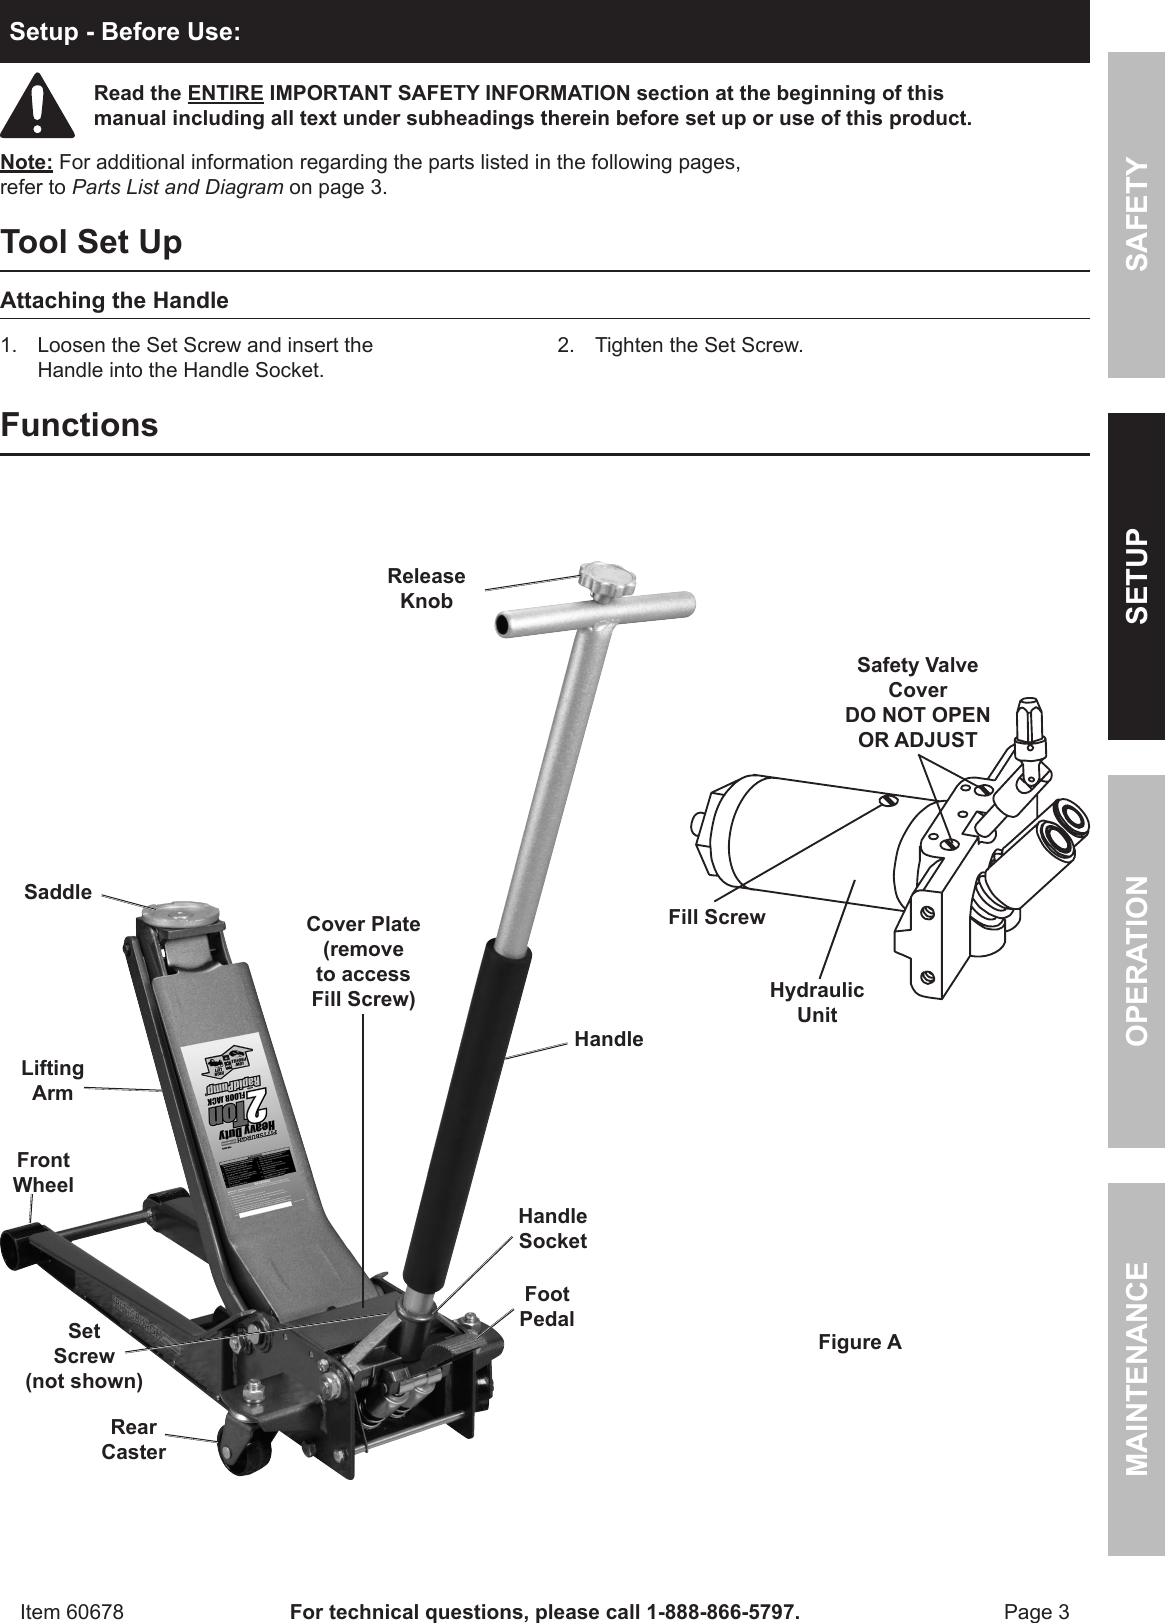 Page 3 of 8 - Harbor-Freight Harbor-Freight-2-Ton-Low-Profile-Long-Reach-Steel-Heavy-Duty-Floor-Jack-With-Rapid-Pump-Product-Manual-  Harbor-freight-2-ton-low-profile-long-reach-steel-heavy-duty-floor-jack-with-rapid-pump-product-manual